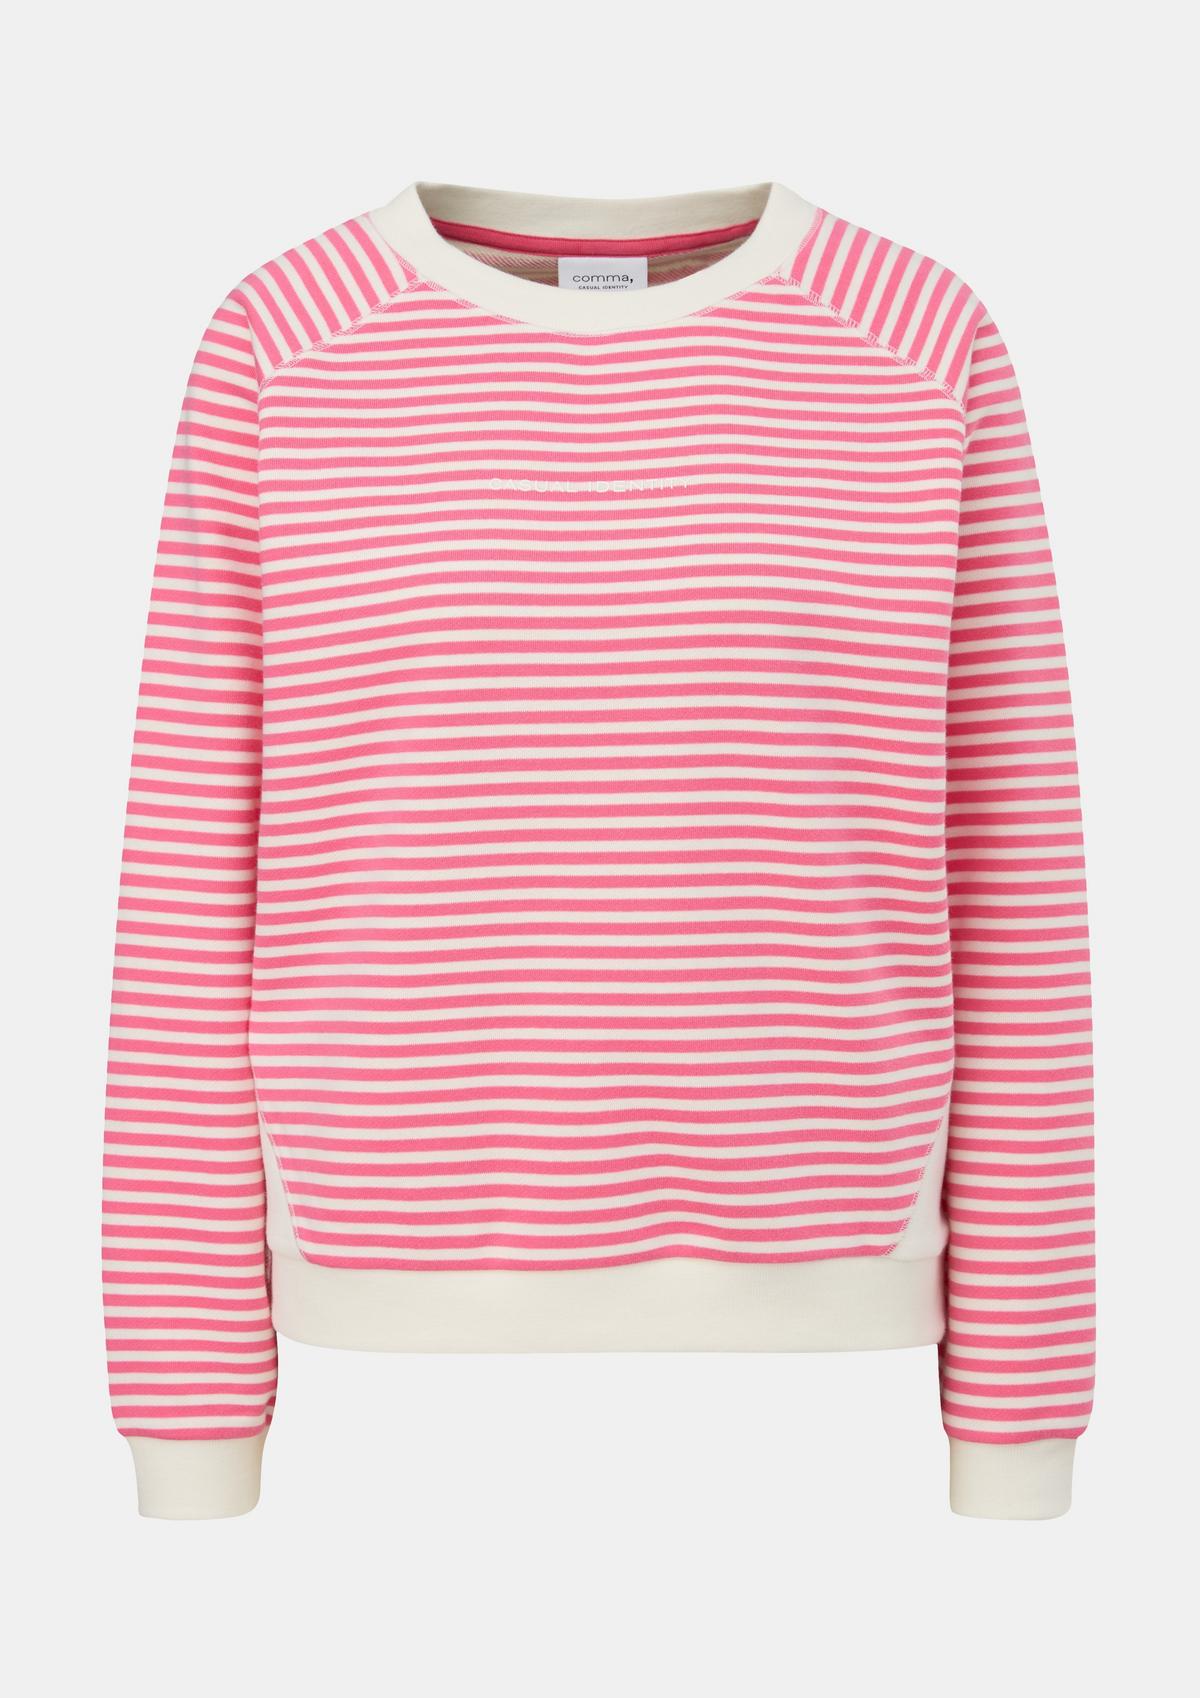 comma Sweatshirt with a striped pattern